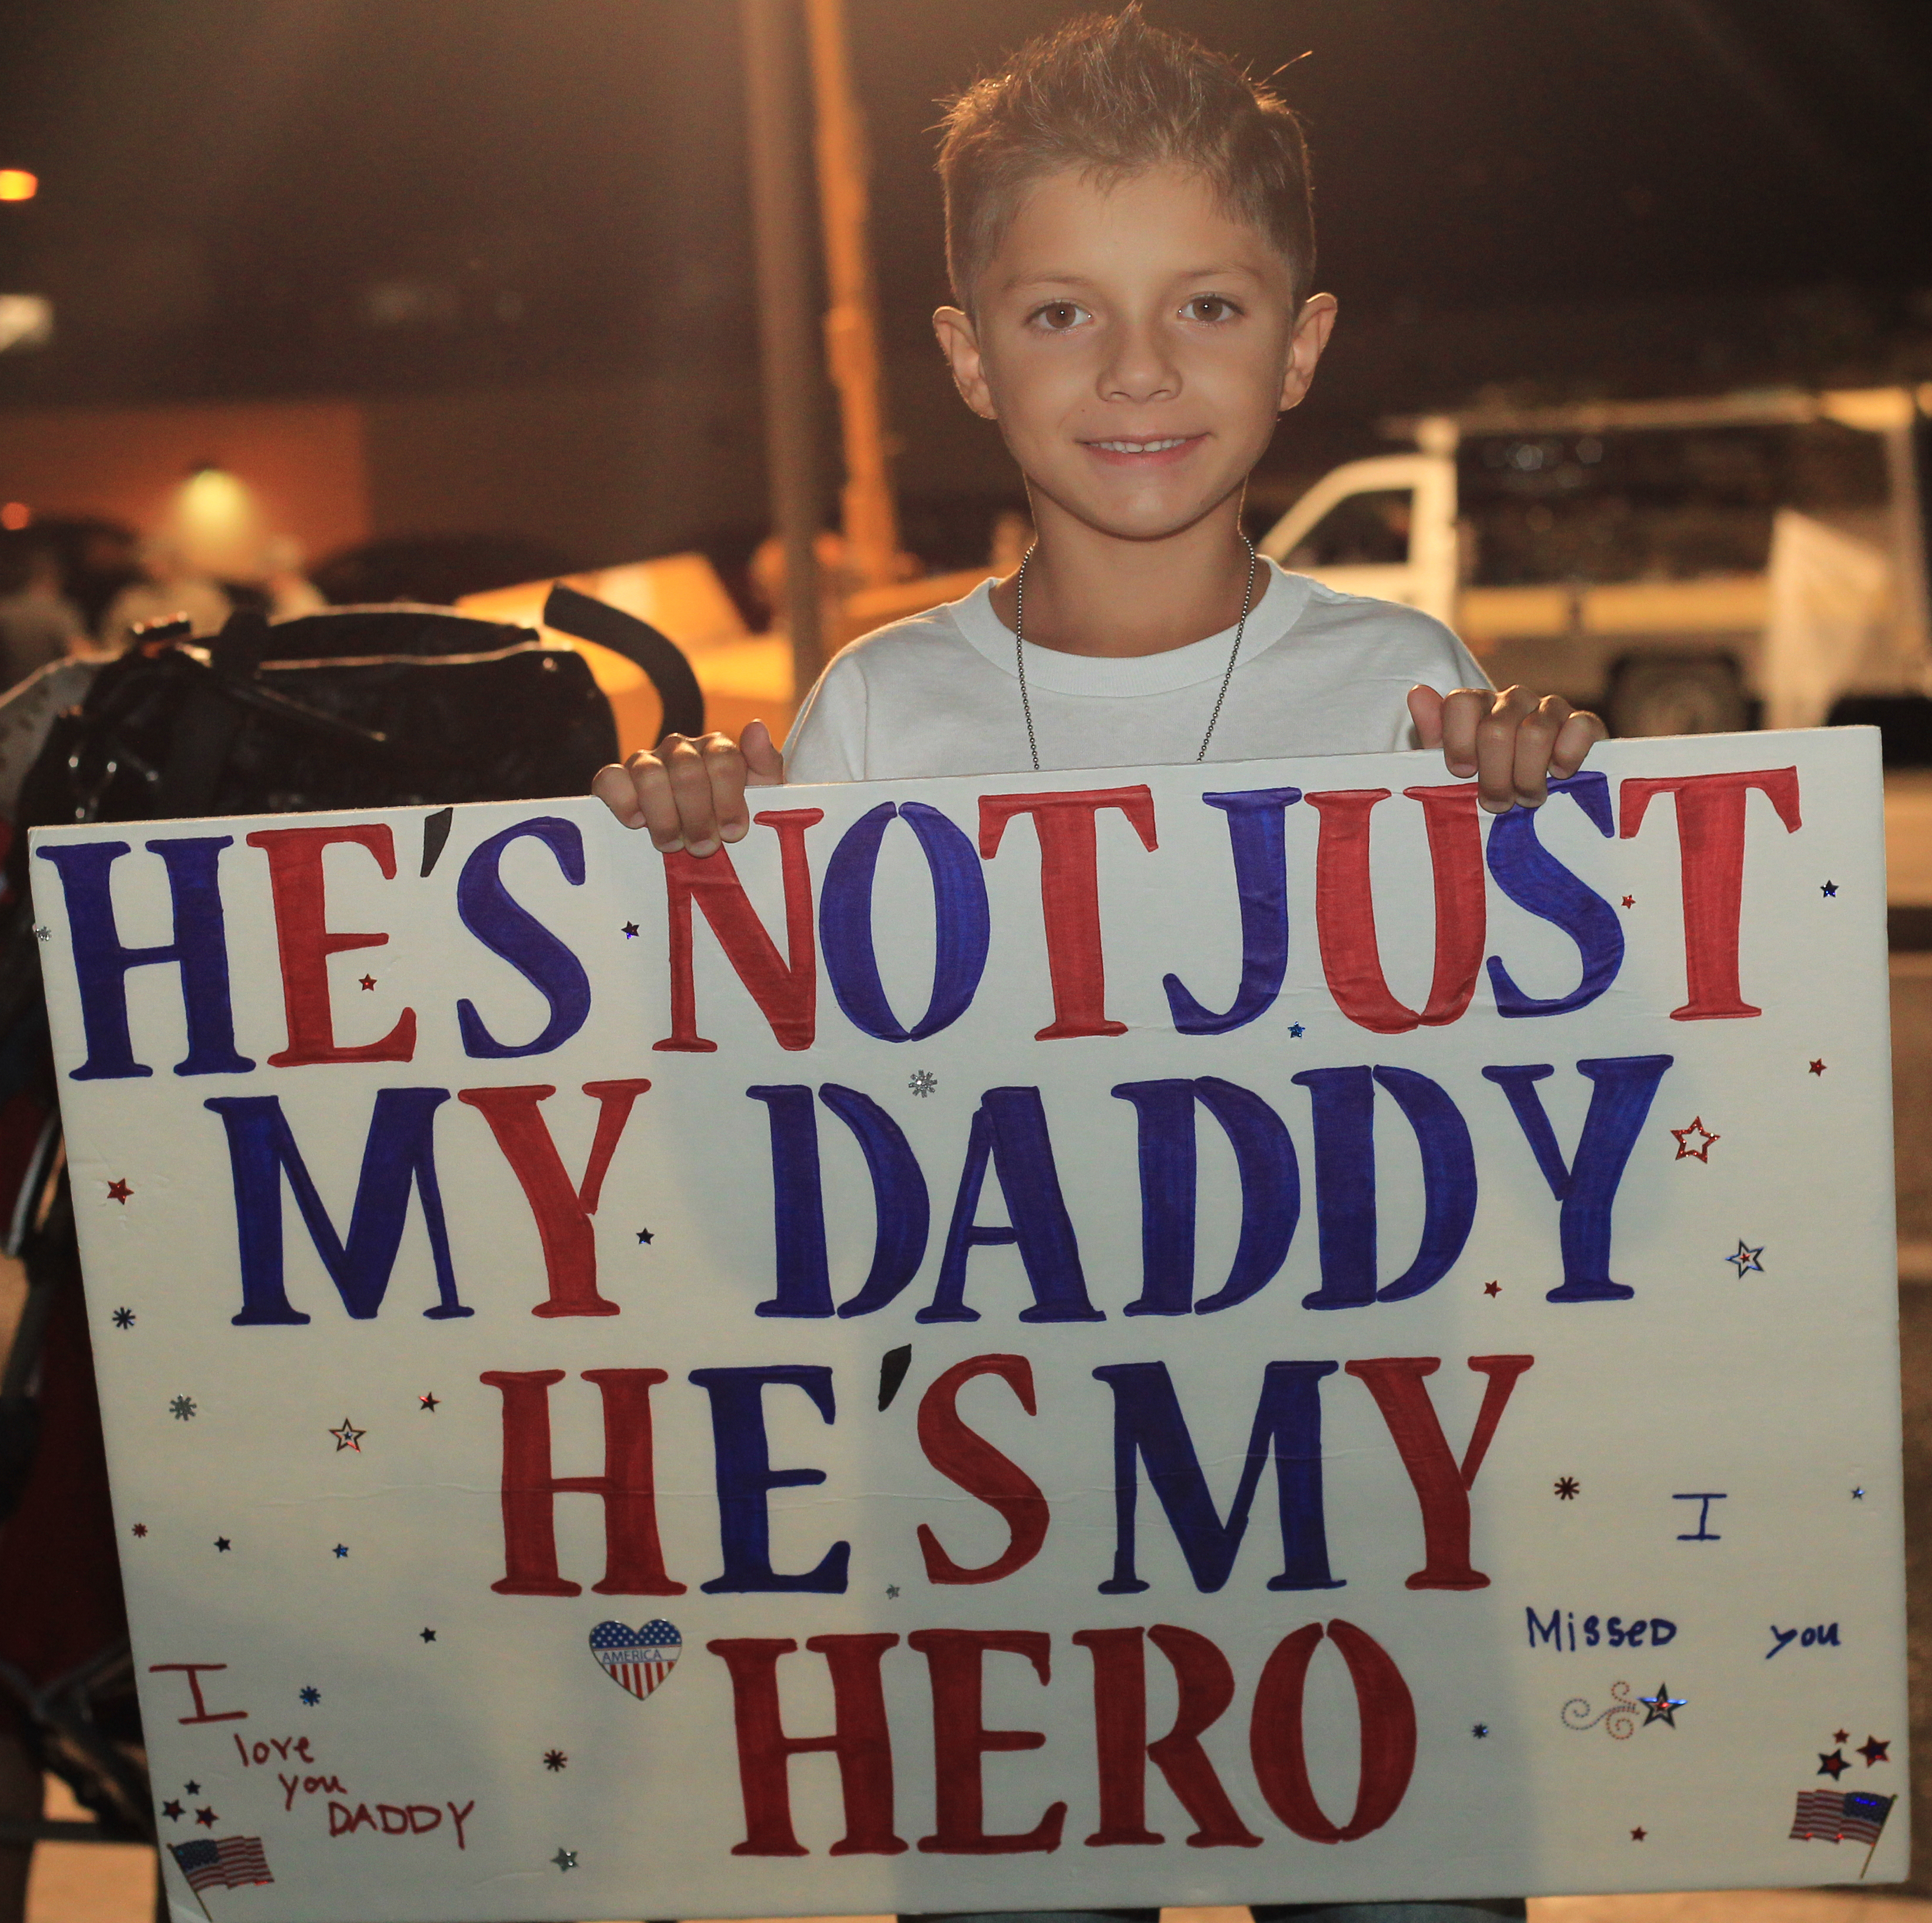 Great, real life ideas for homecoming signs. Keeping for the next deployment. #military #militaryfamily #militaryspouse #milspouse #milso #milspo #inspiration #homecomingsign #crafty #family #deployment #deploymentlife #deploymentsucks